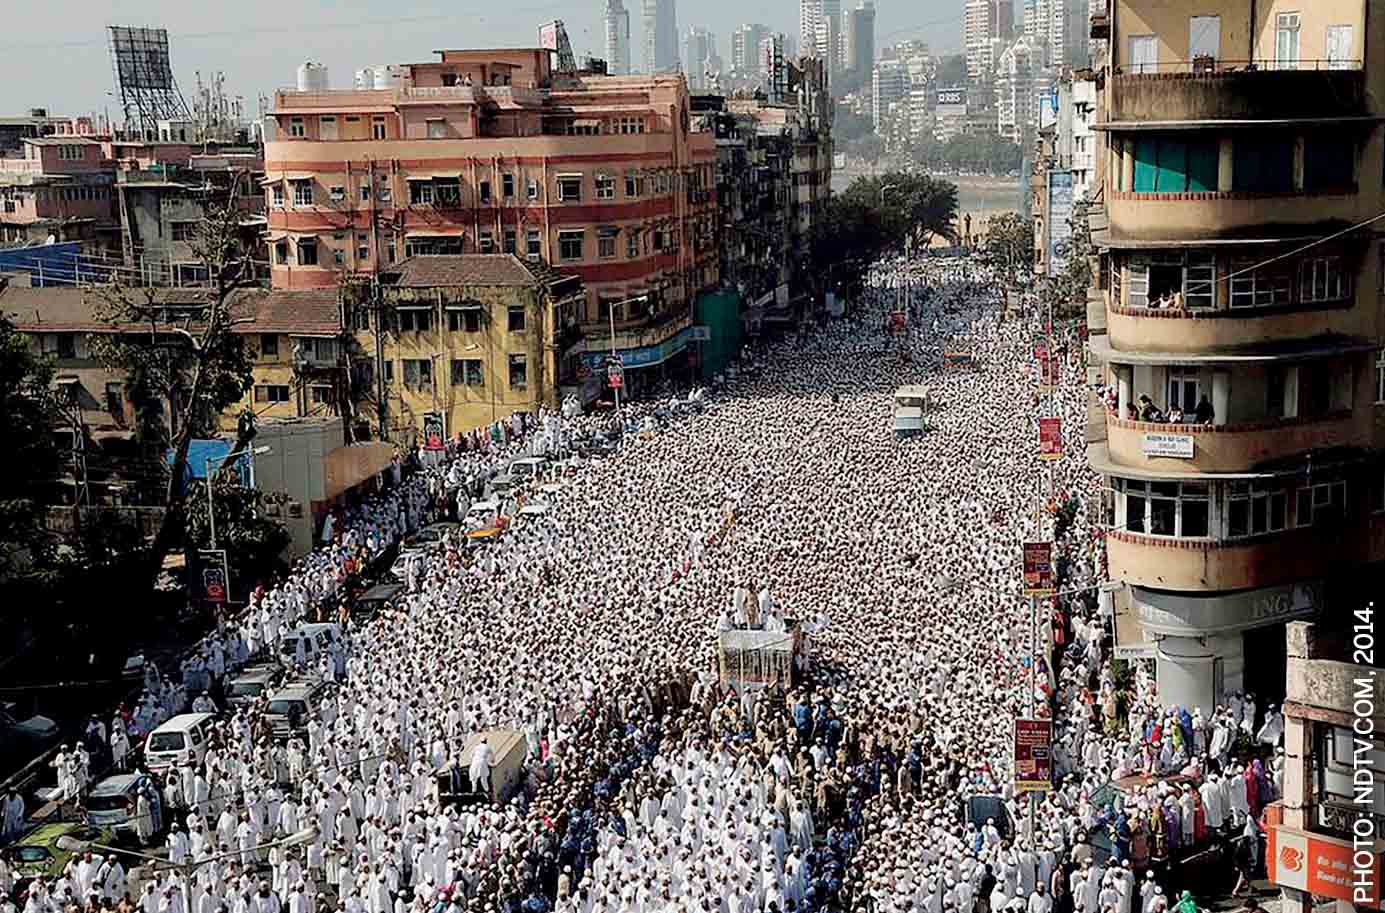 redefining-public-space-sacred-meanings-funeral-procession-holiness-dr-syedna-mohammed-burhanuddin-ra-mumbai-india